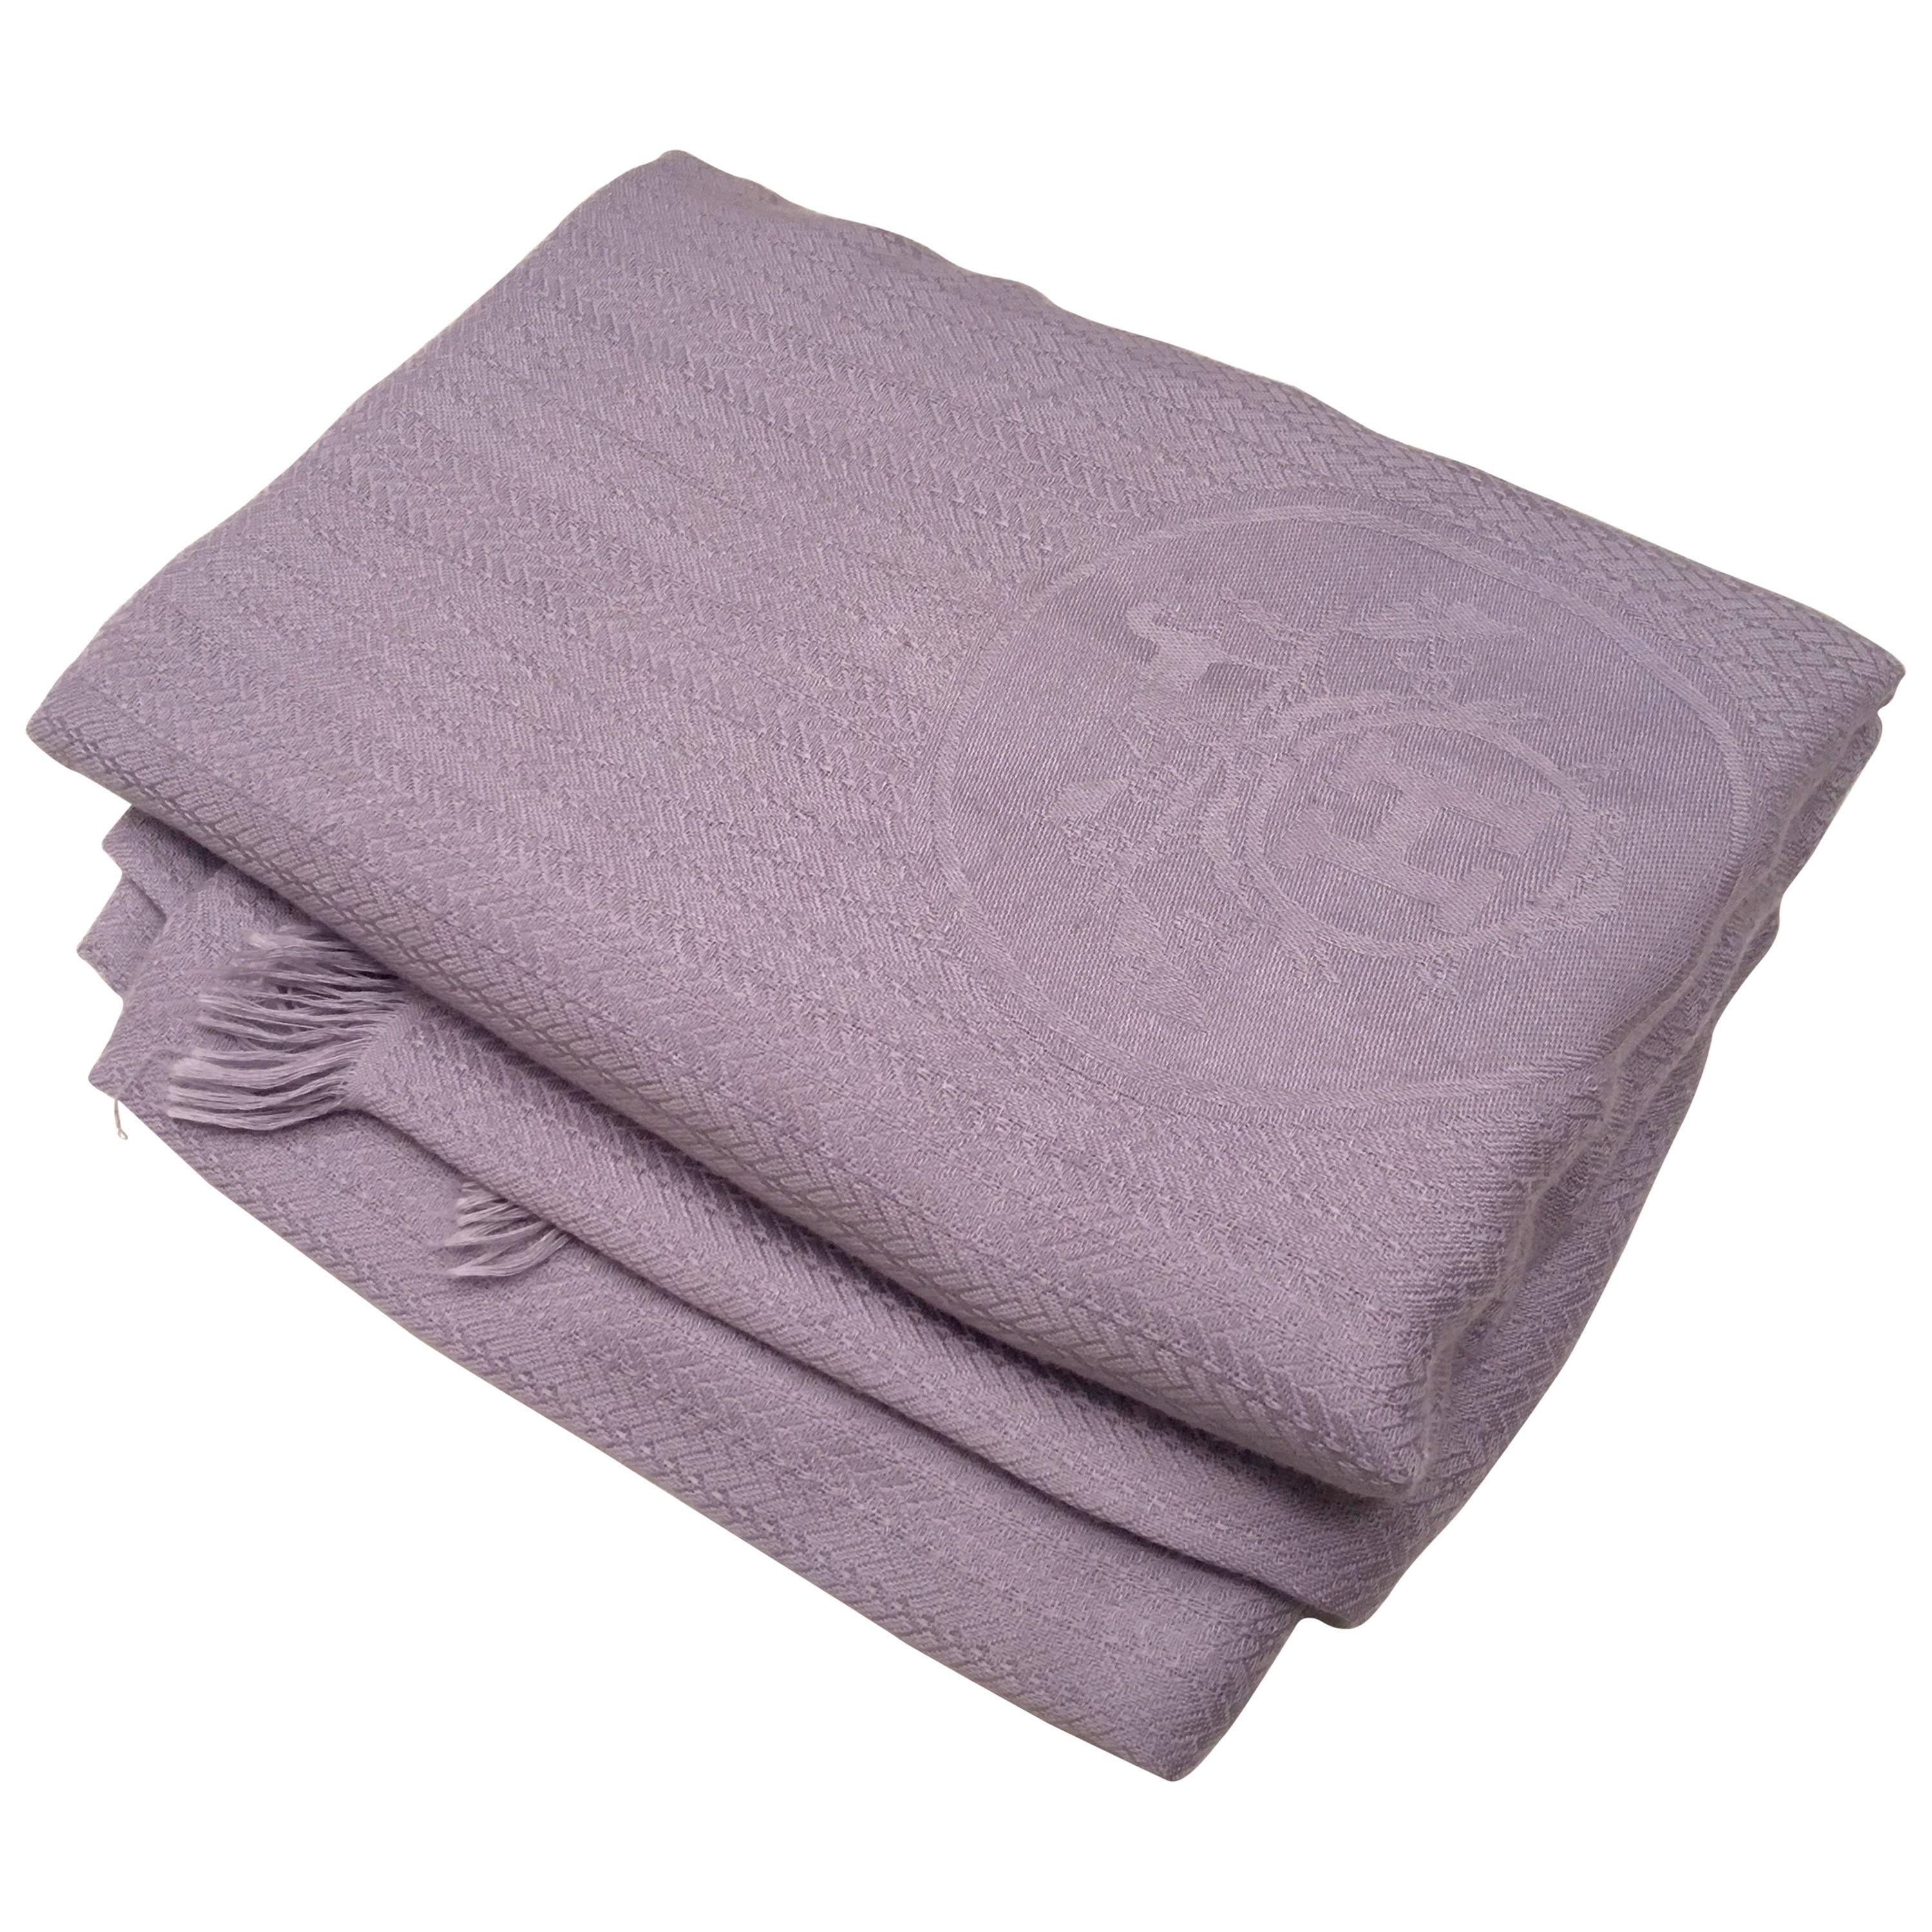 Presented here is a vintage lavender Hermes shawl. The beautiful shade of violet and the plush color shows off the incredible quality. This style is no longer made. It was very expensive when it was originally made in the 90’s so there is double ply